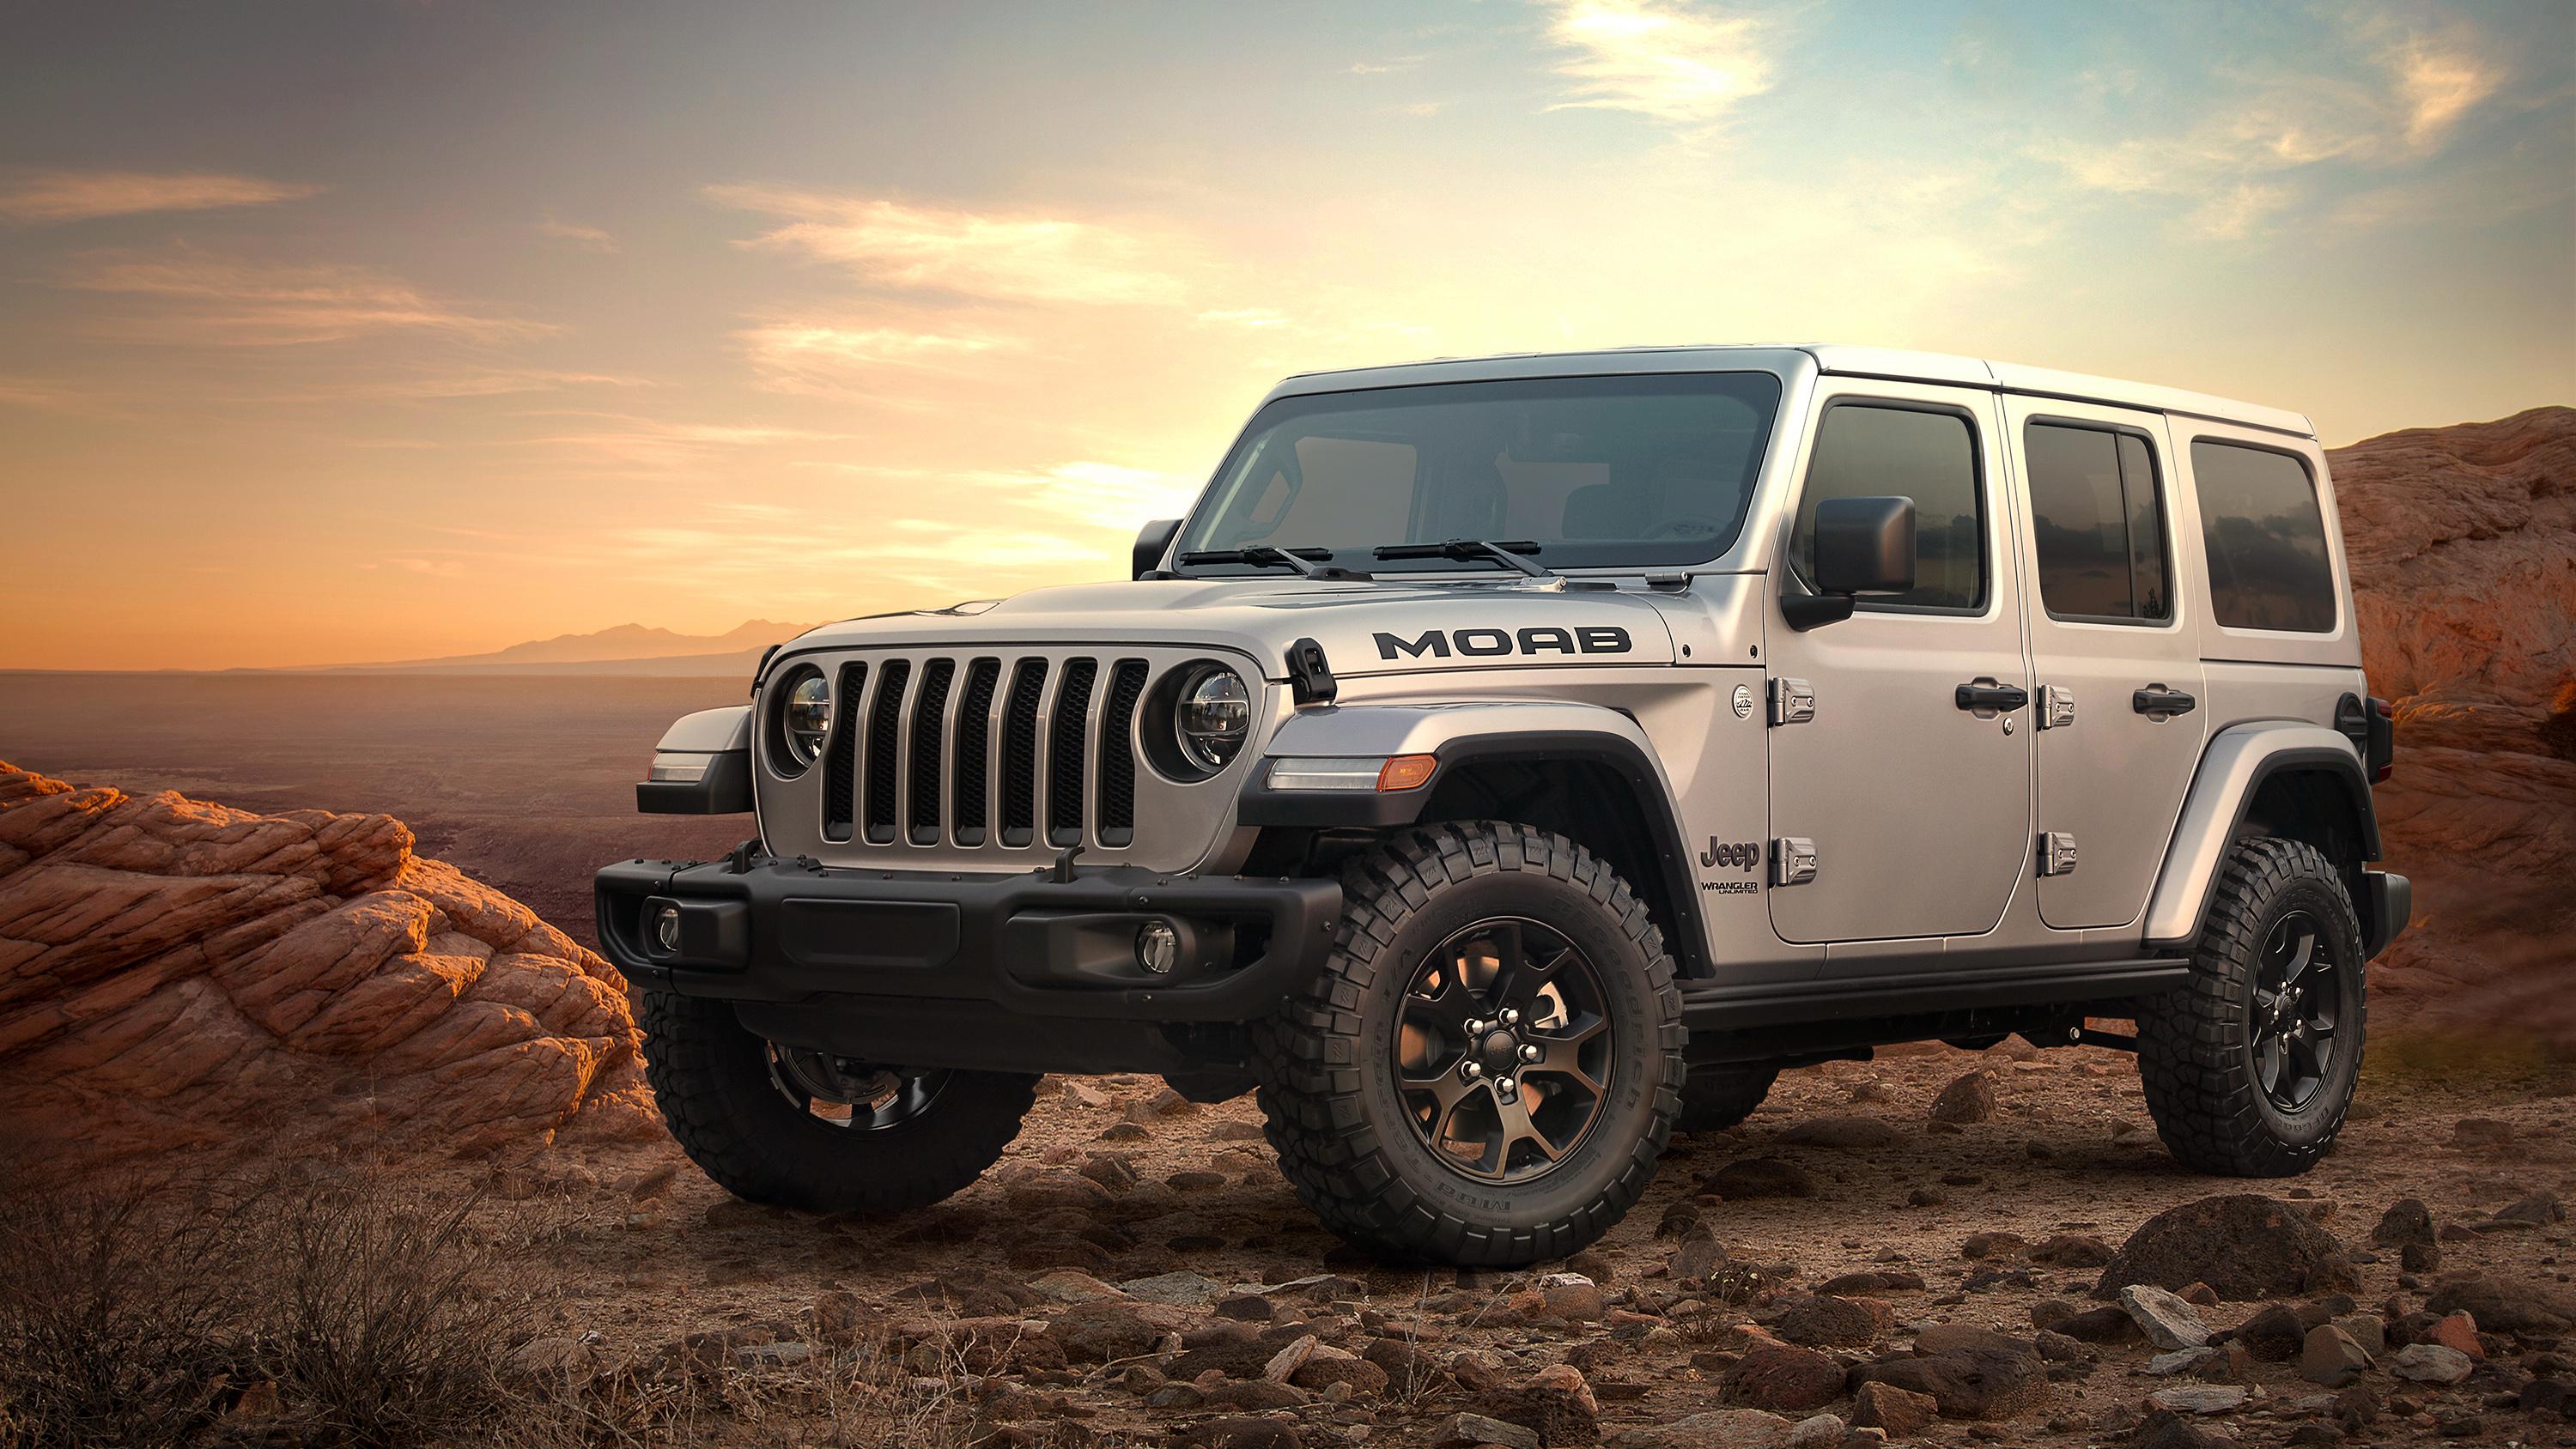 Jeep Wrangler Wallpapers Top Free Jeep Wrangler Backgrounds Wallpaperaccess